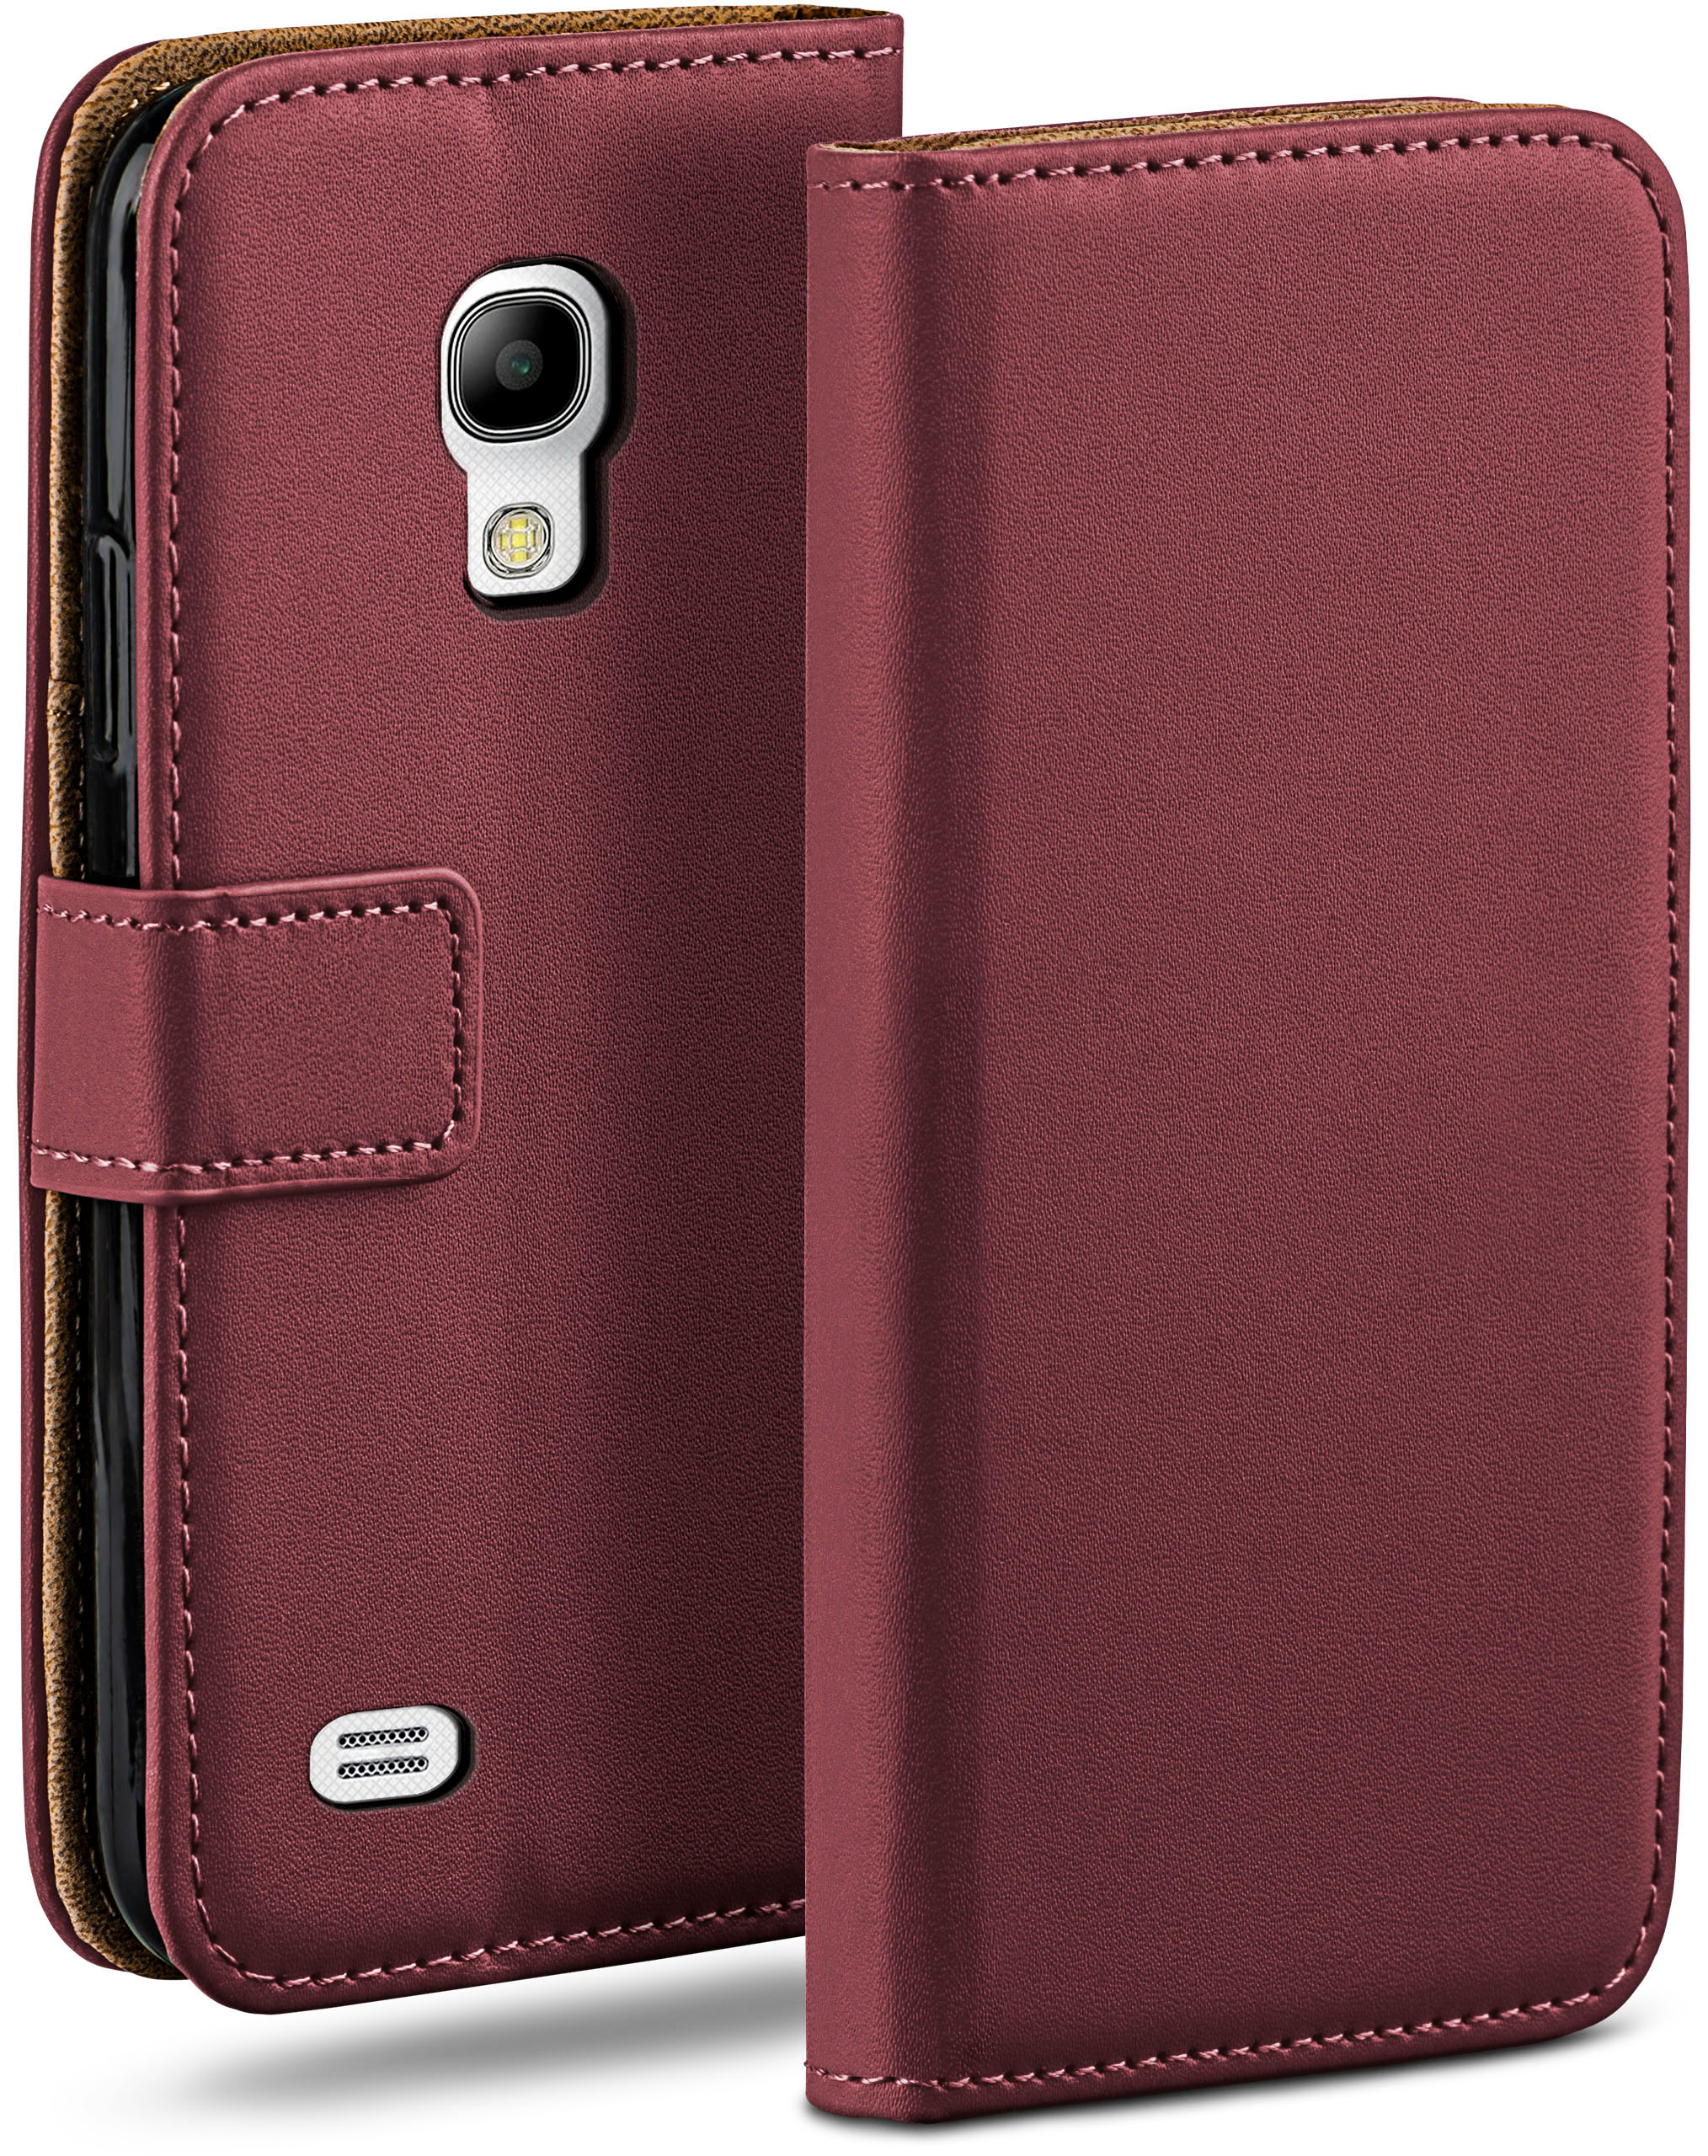 MOEX Book Samsung, Case, S4, Bookcover, Maroon-Red Galaxy